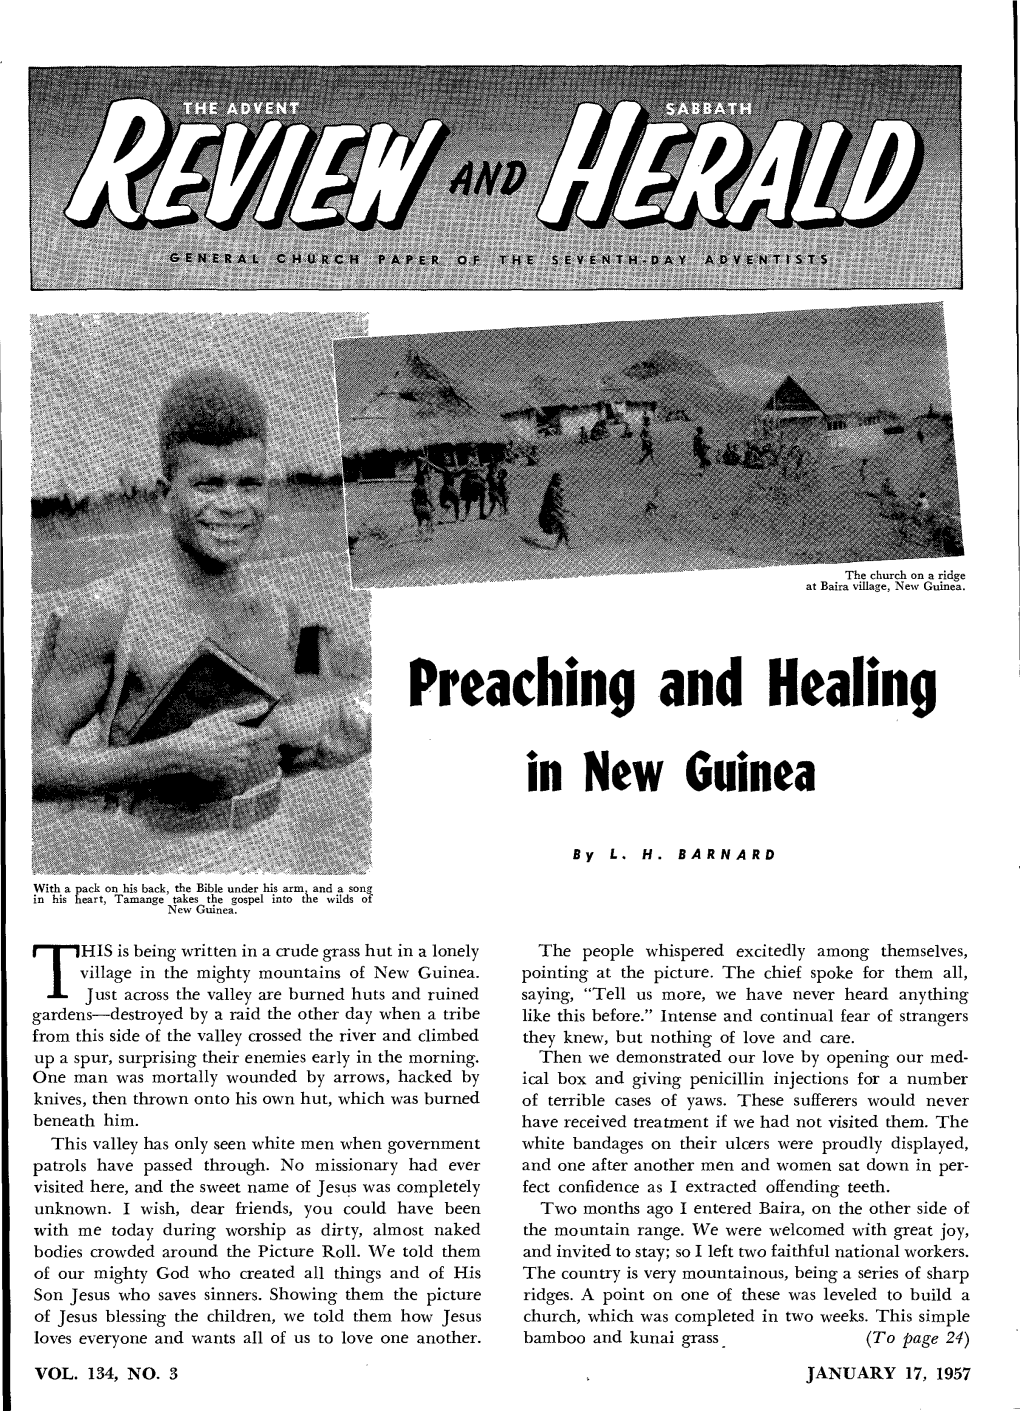 Preaching and Healing in New Guinea